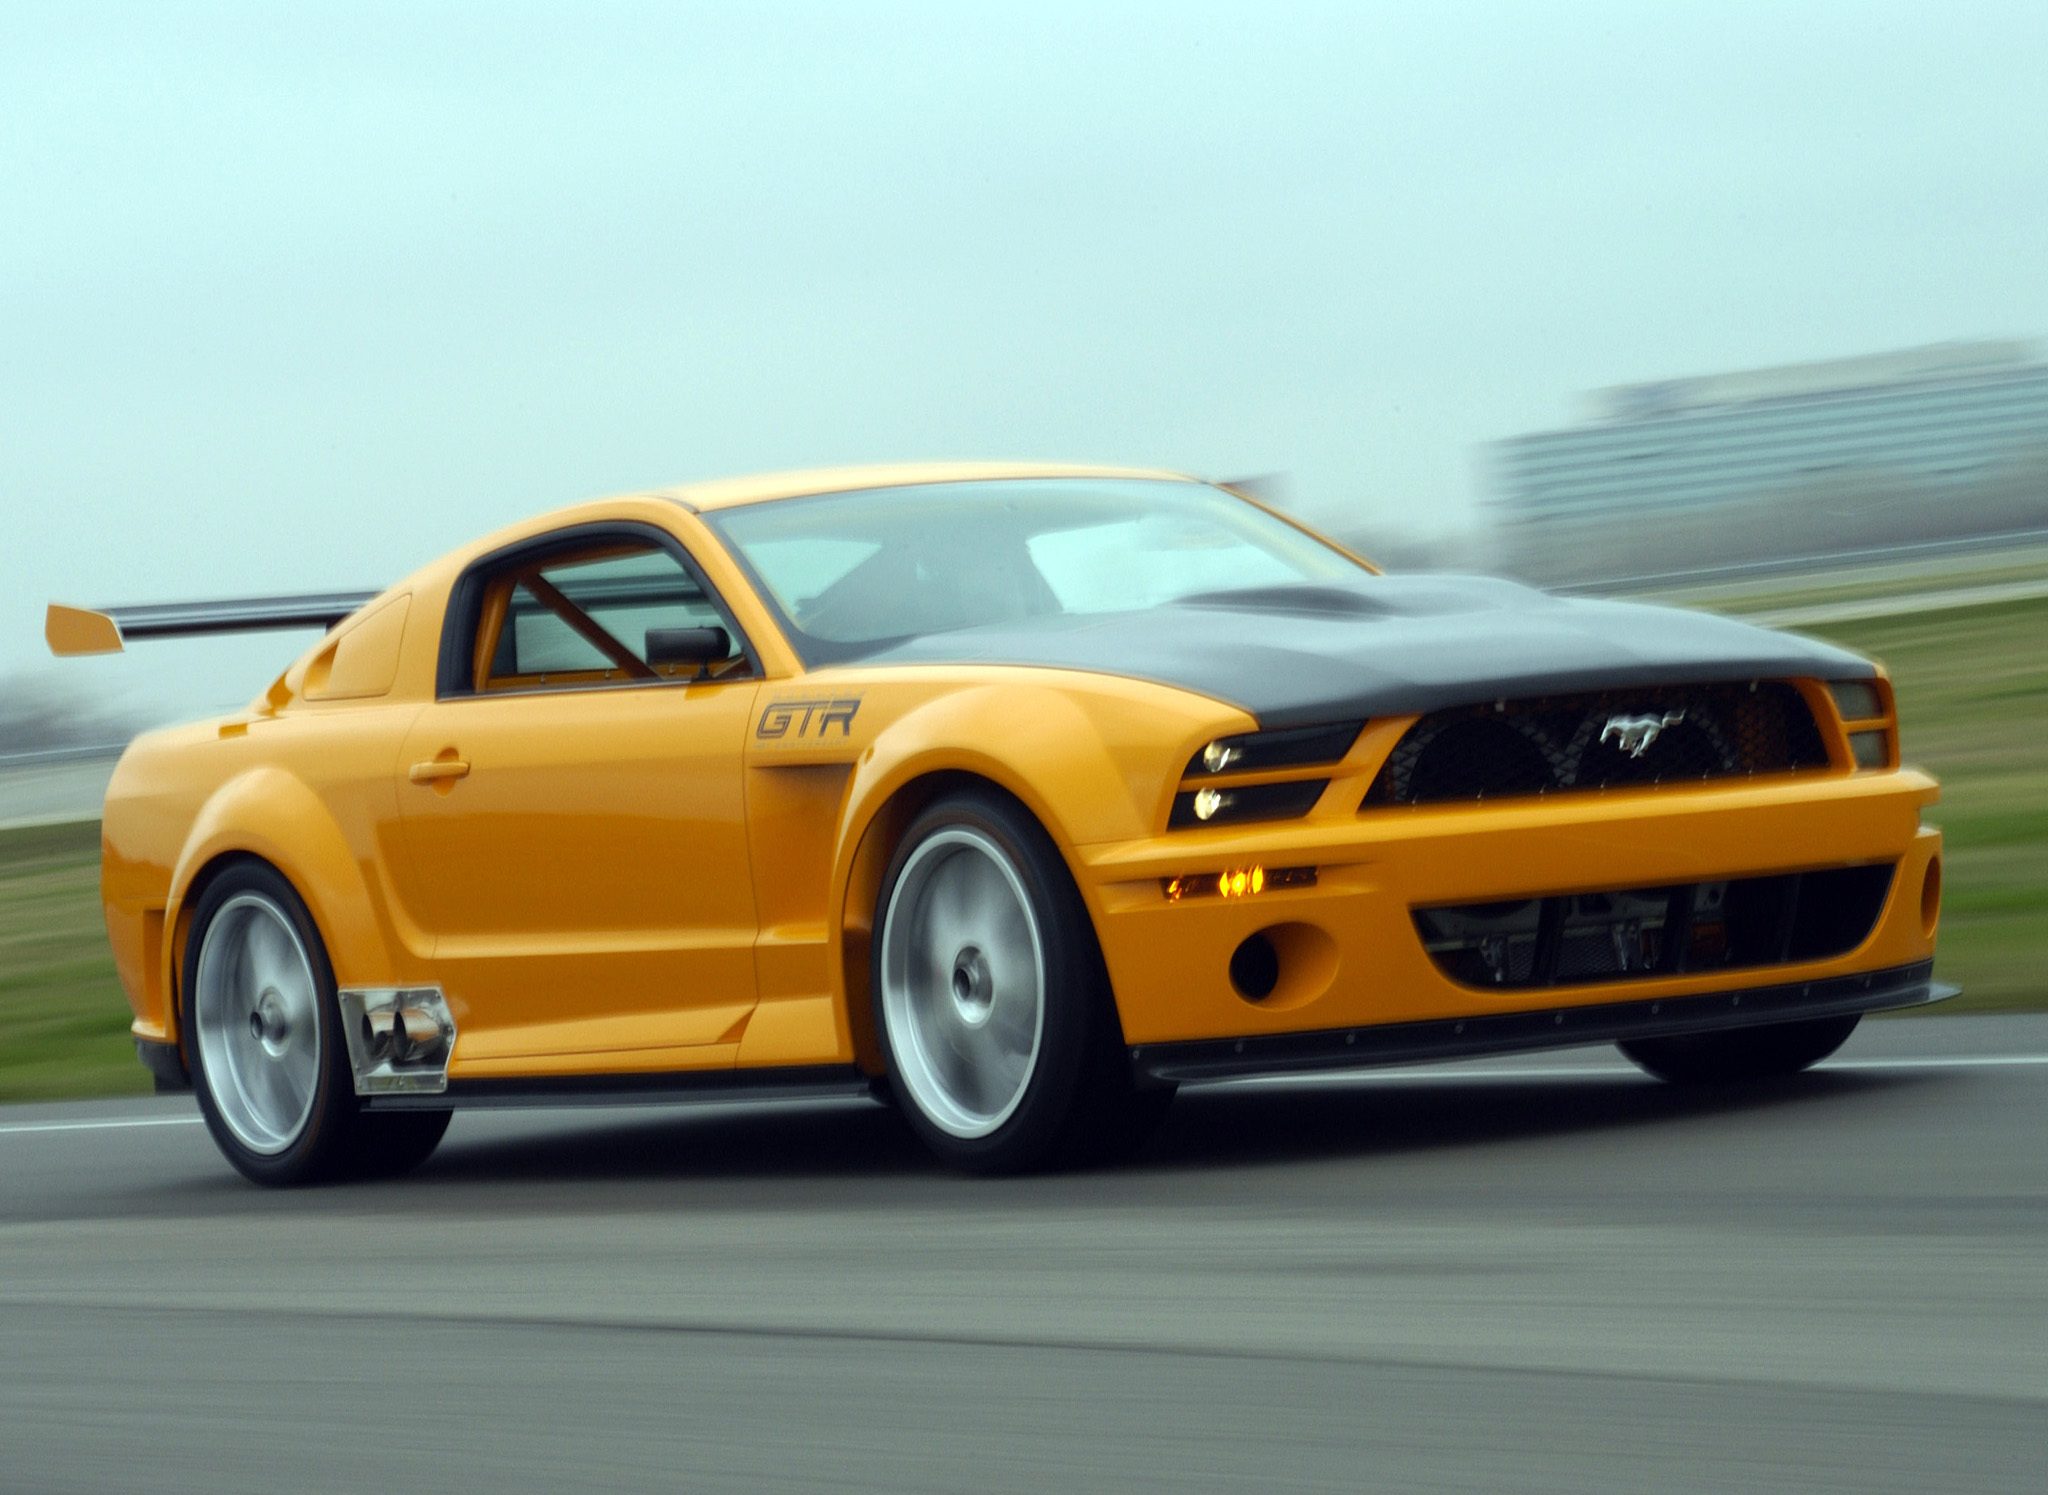 Mustang Of The Day: 2004 Ford Mustang GTR Concept